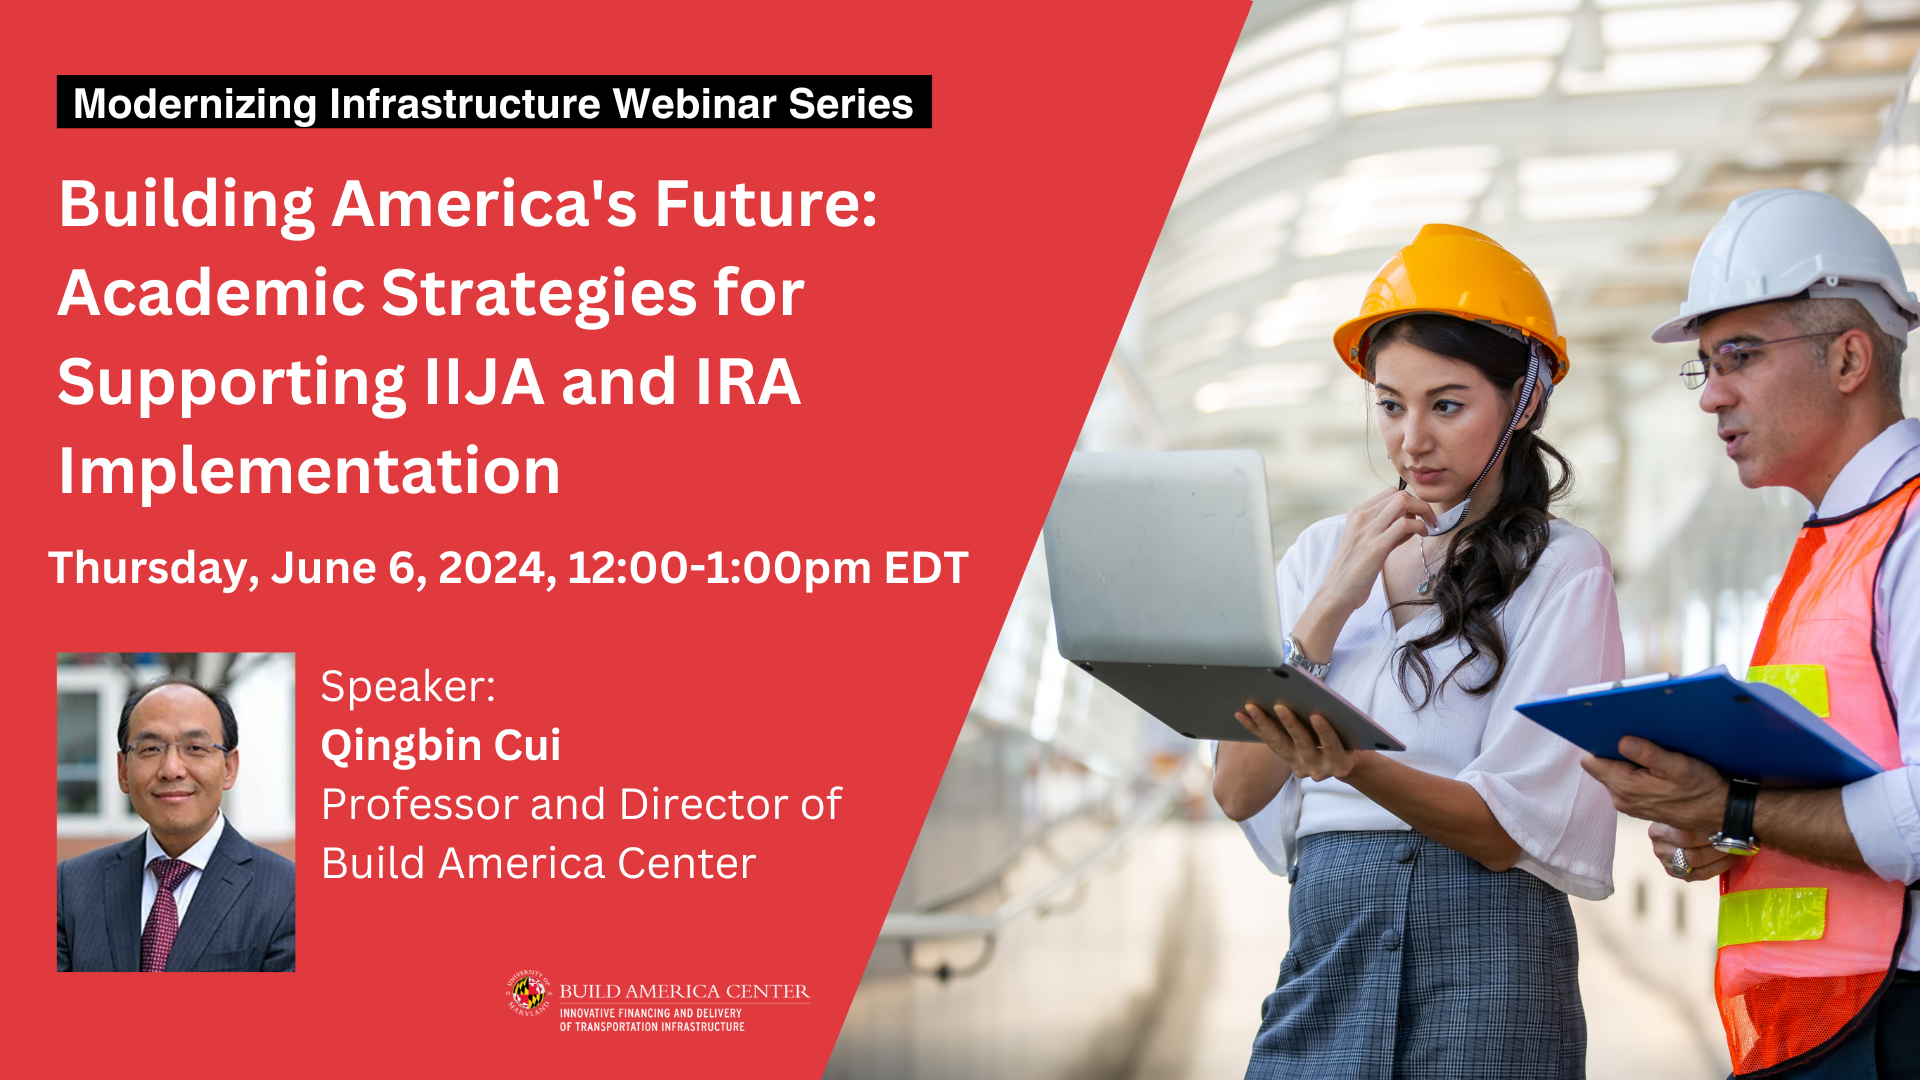 Building America’s Future: Academic Strategies for Supporting IIJA and IRA Implementation